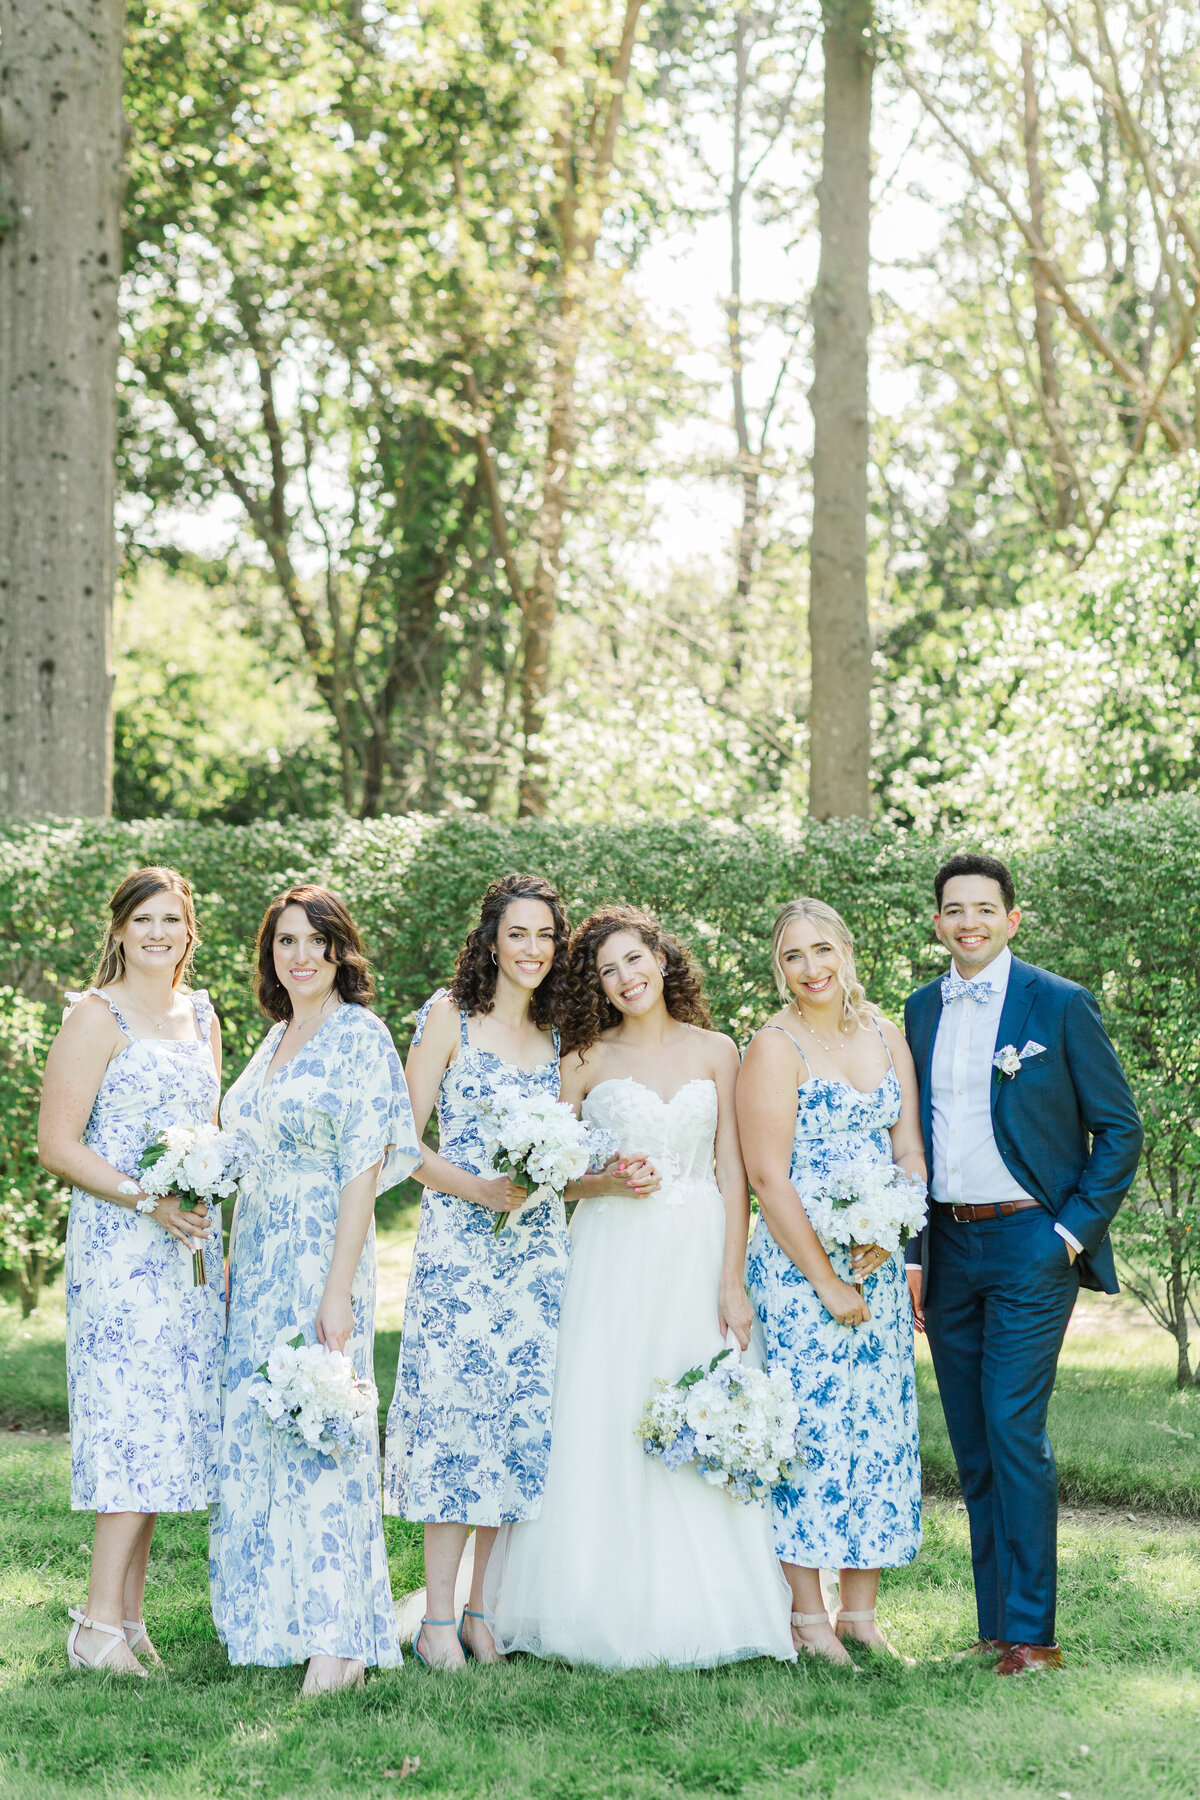 A bride is standing on the grounds of Glen Magna Farms in Danvers, MA with her bridal party. All of them are smiling at the camera and standing casually. The bridesmaids are in various blue and white patterned dresses. Captured by MA wedding photographer Lia Rose Weddings